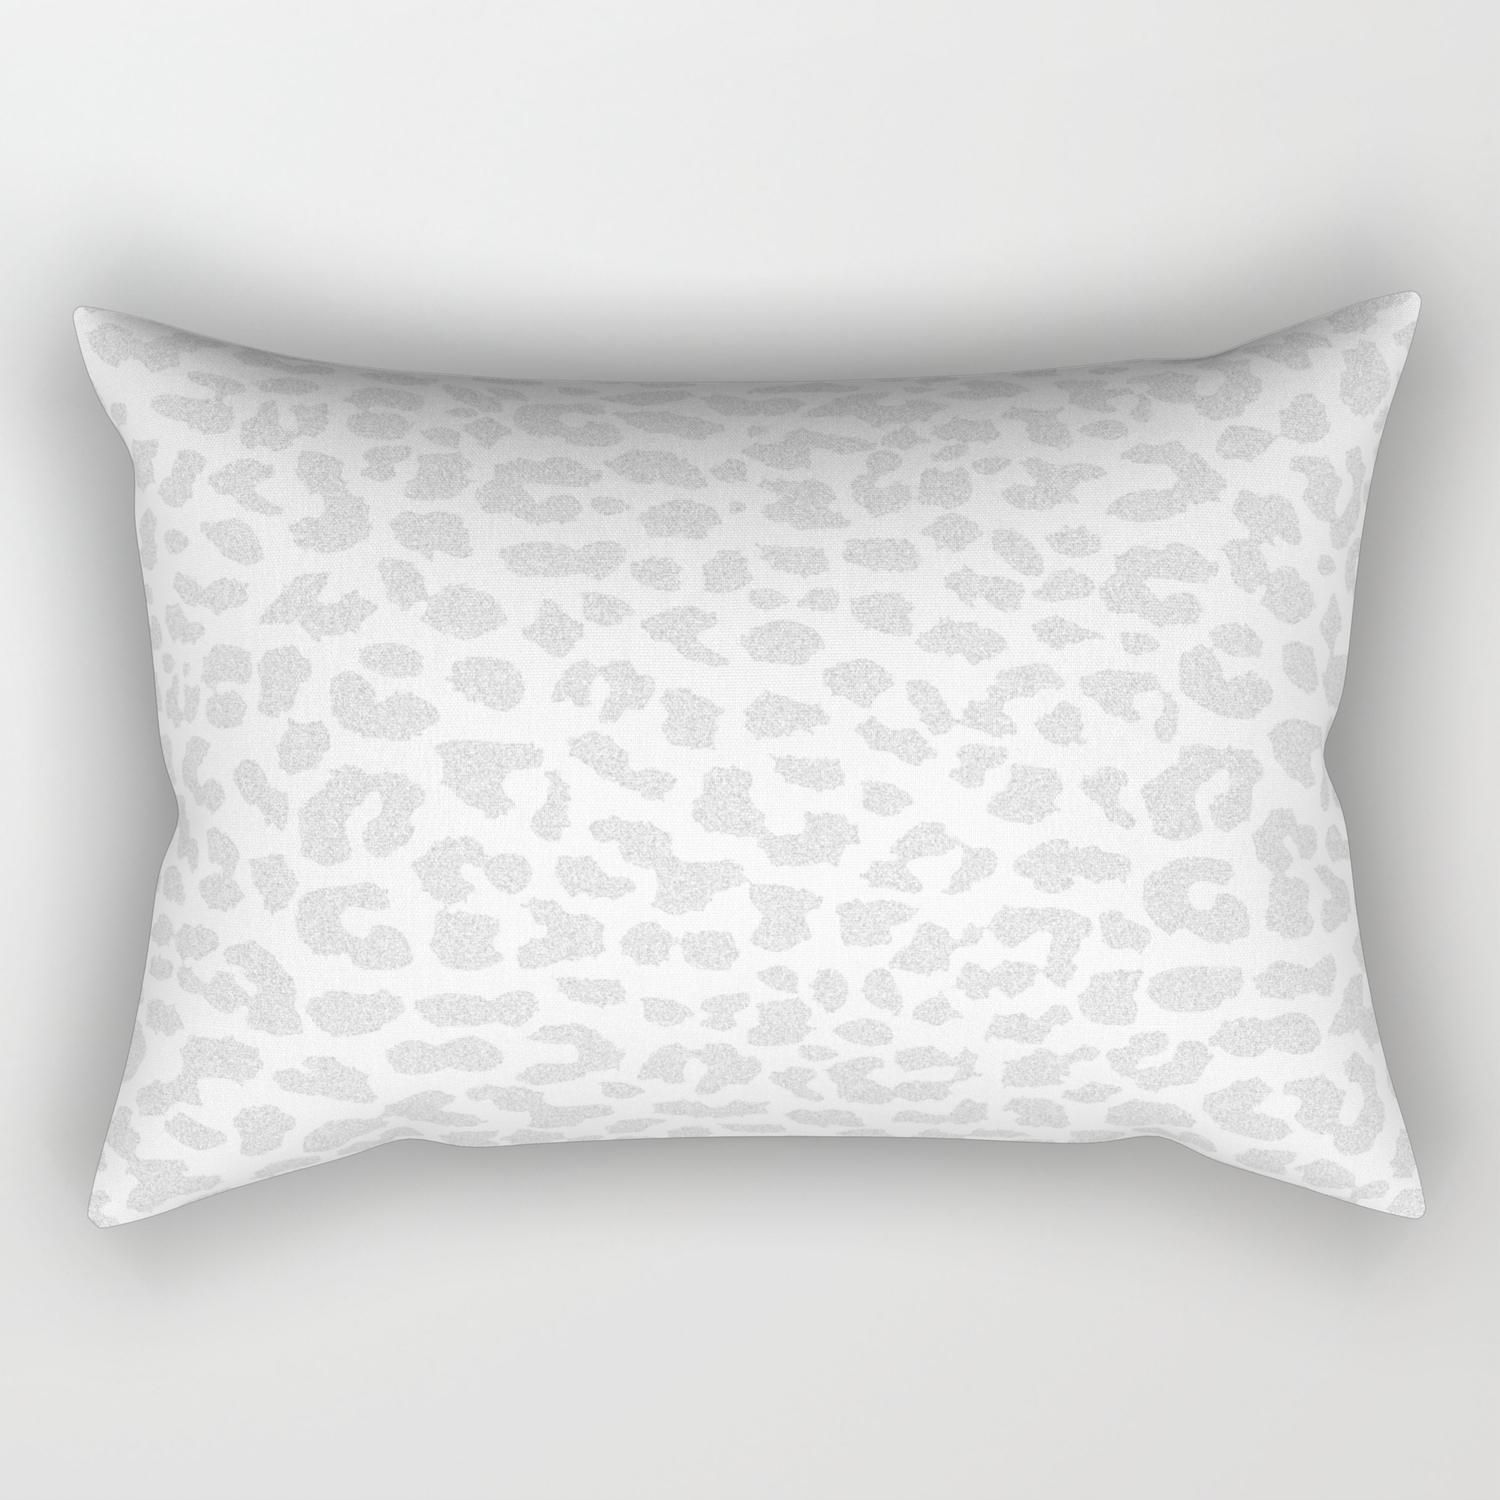 Bronte on Rectangular Pillow Small 17 x 12 Society6 Sea Flower by by 